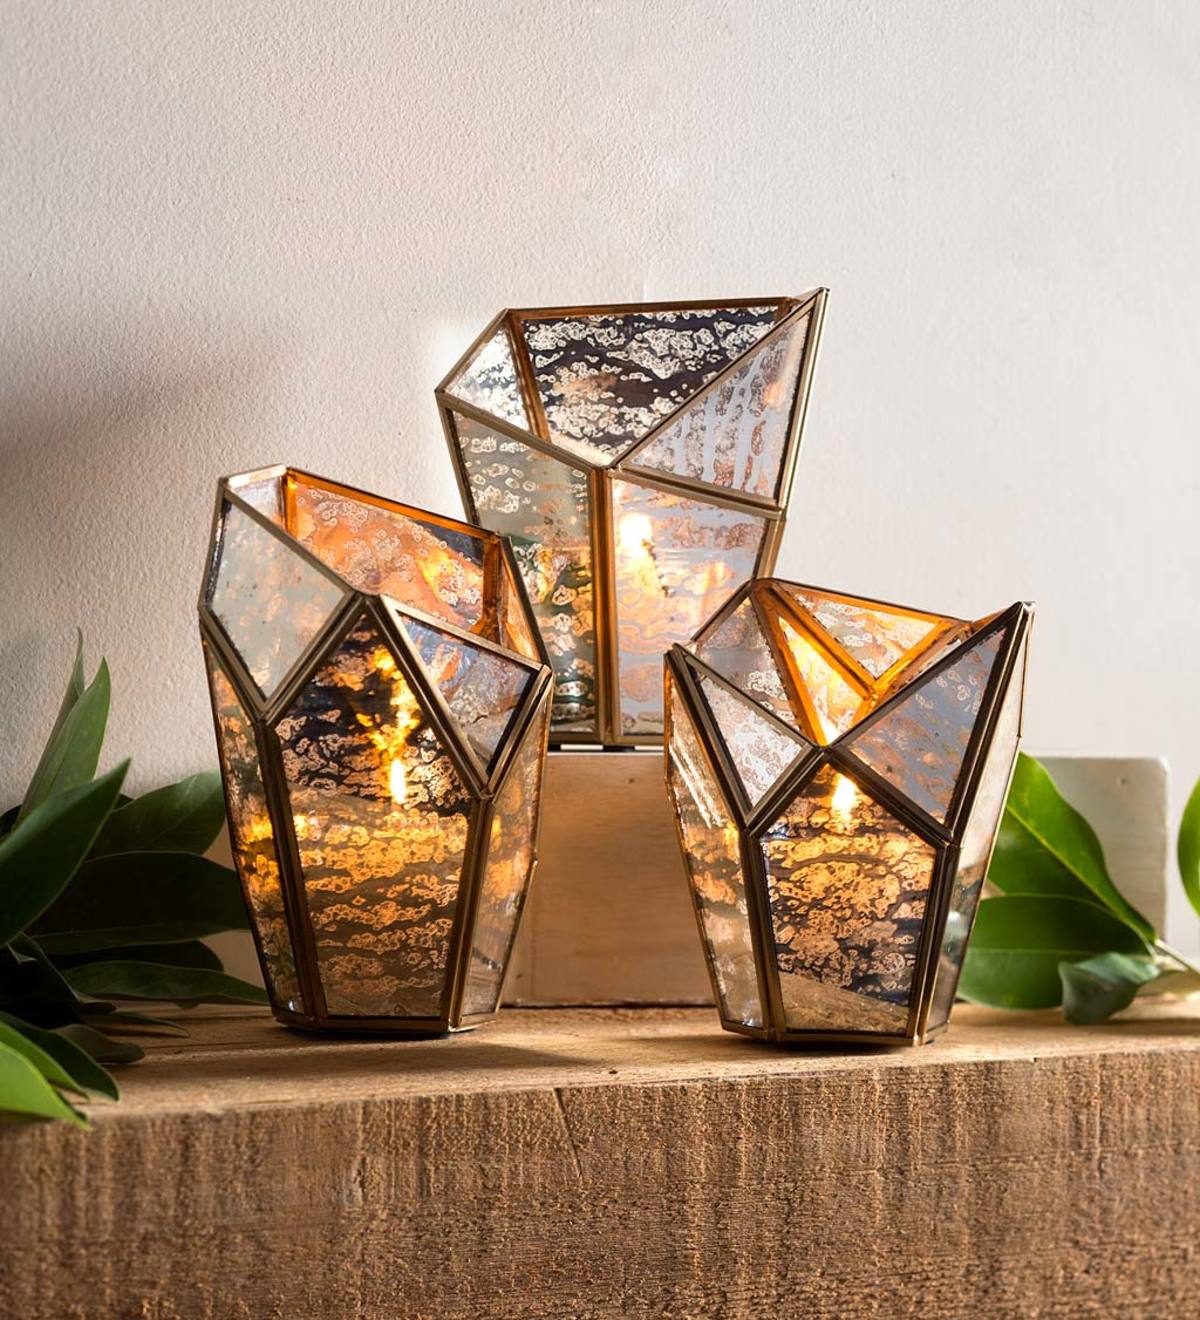 Faceted Mercury Glass Geometric Candle Holders, Set of 3